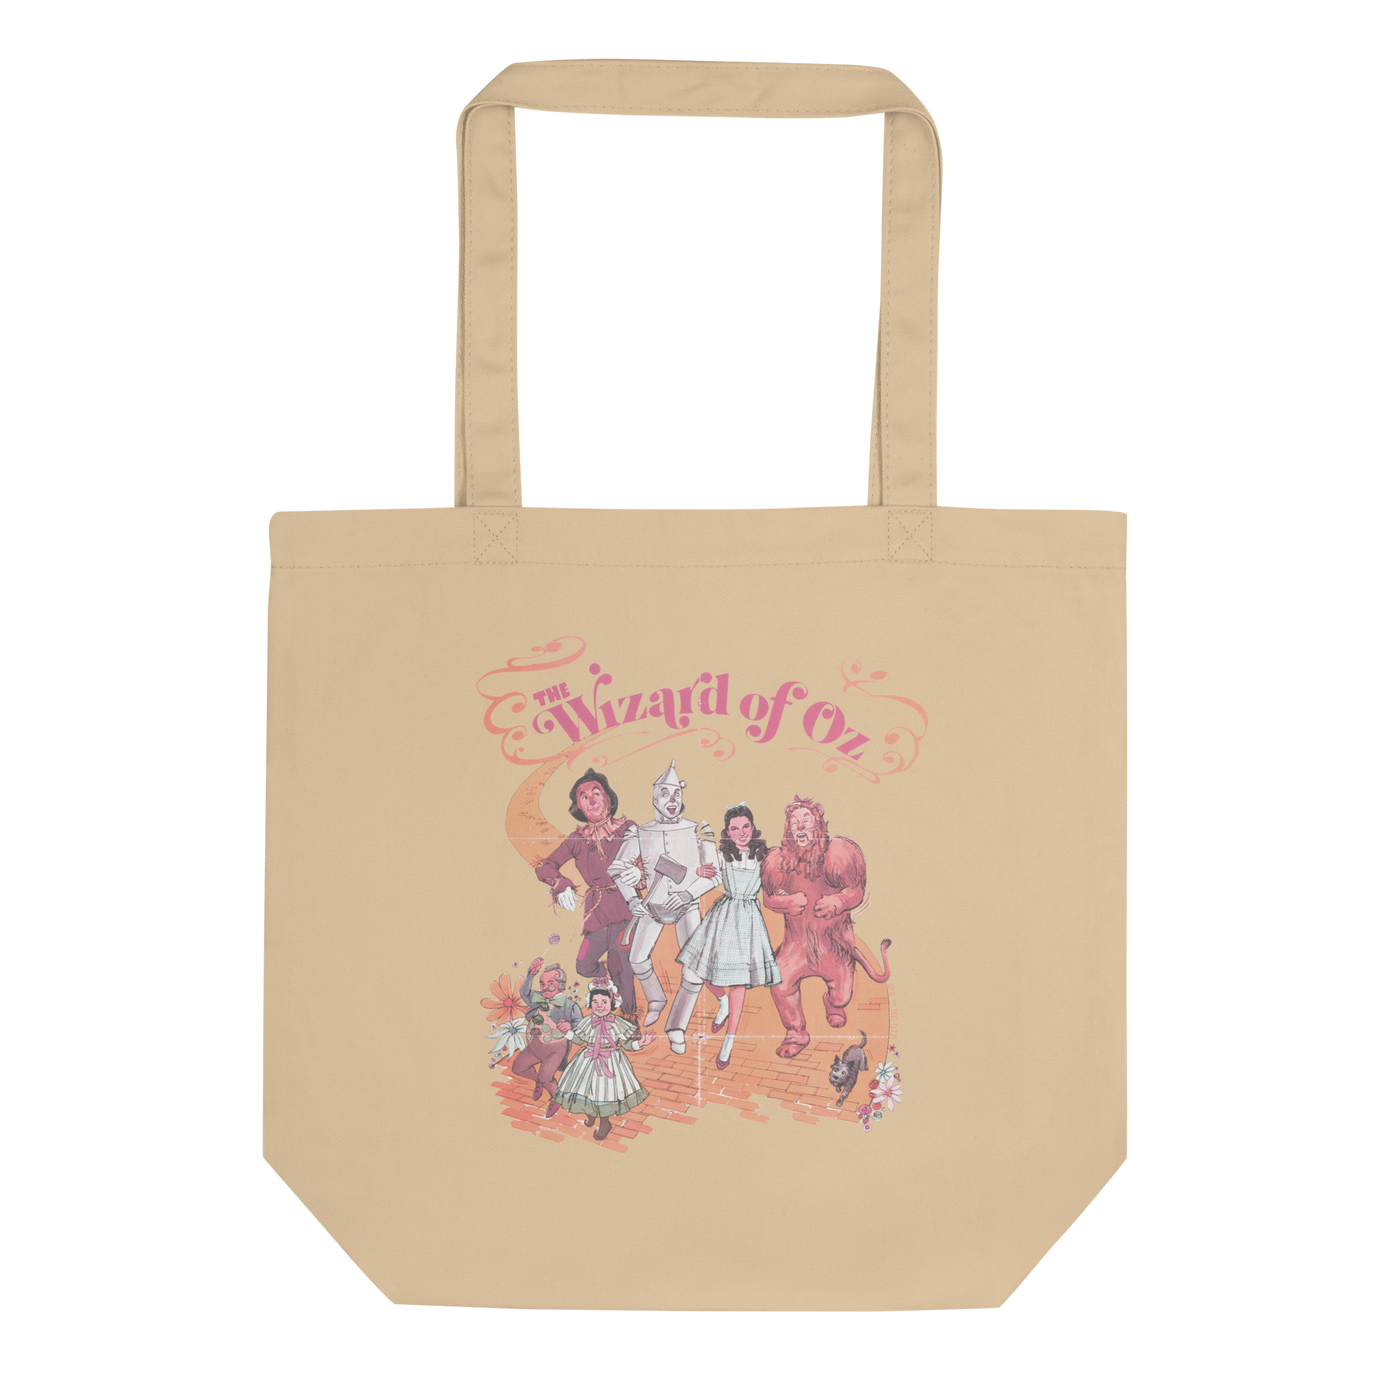 The Wizard of Oz Group Shot Eco Tote Bag